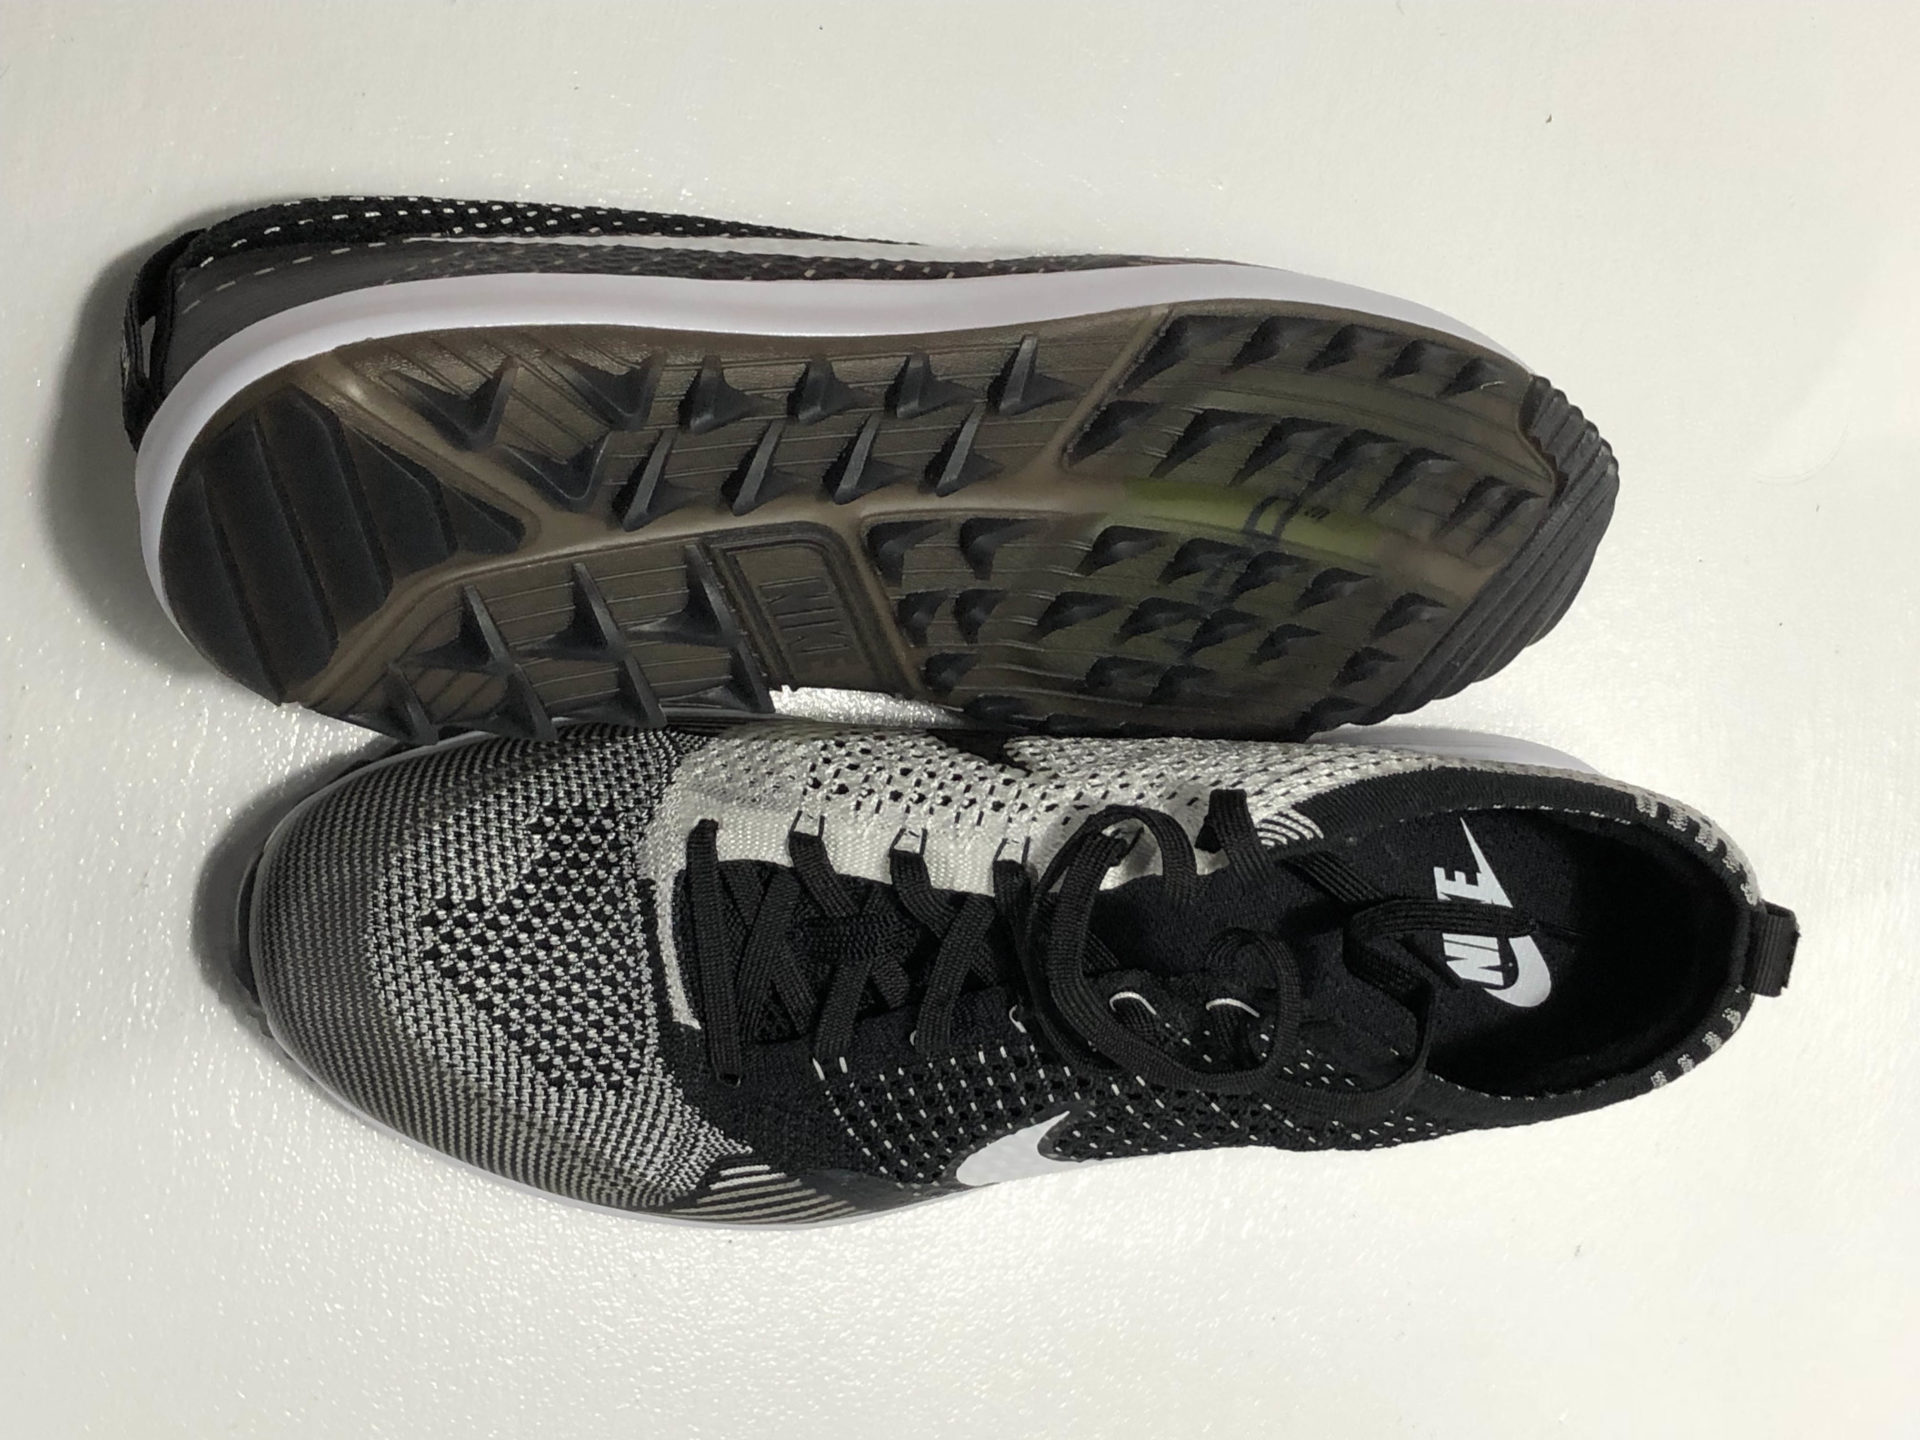 Nike Flyknit Racer G Review: The Golf Shoe I've Been Waiting For